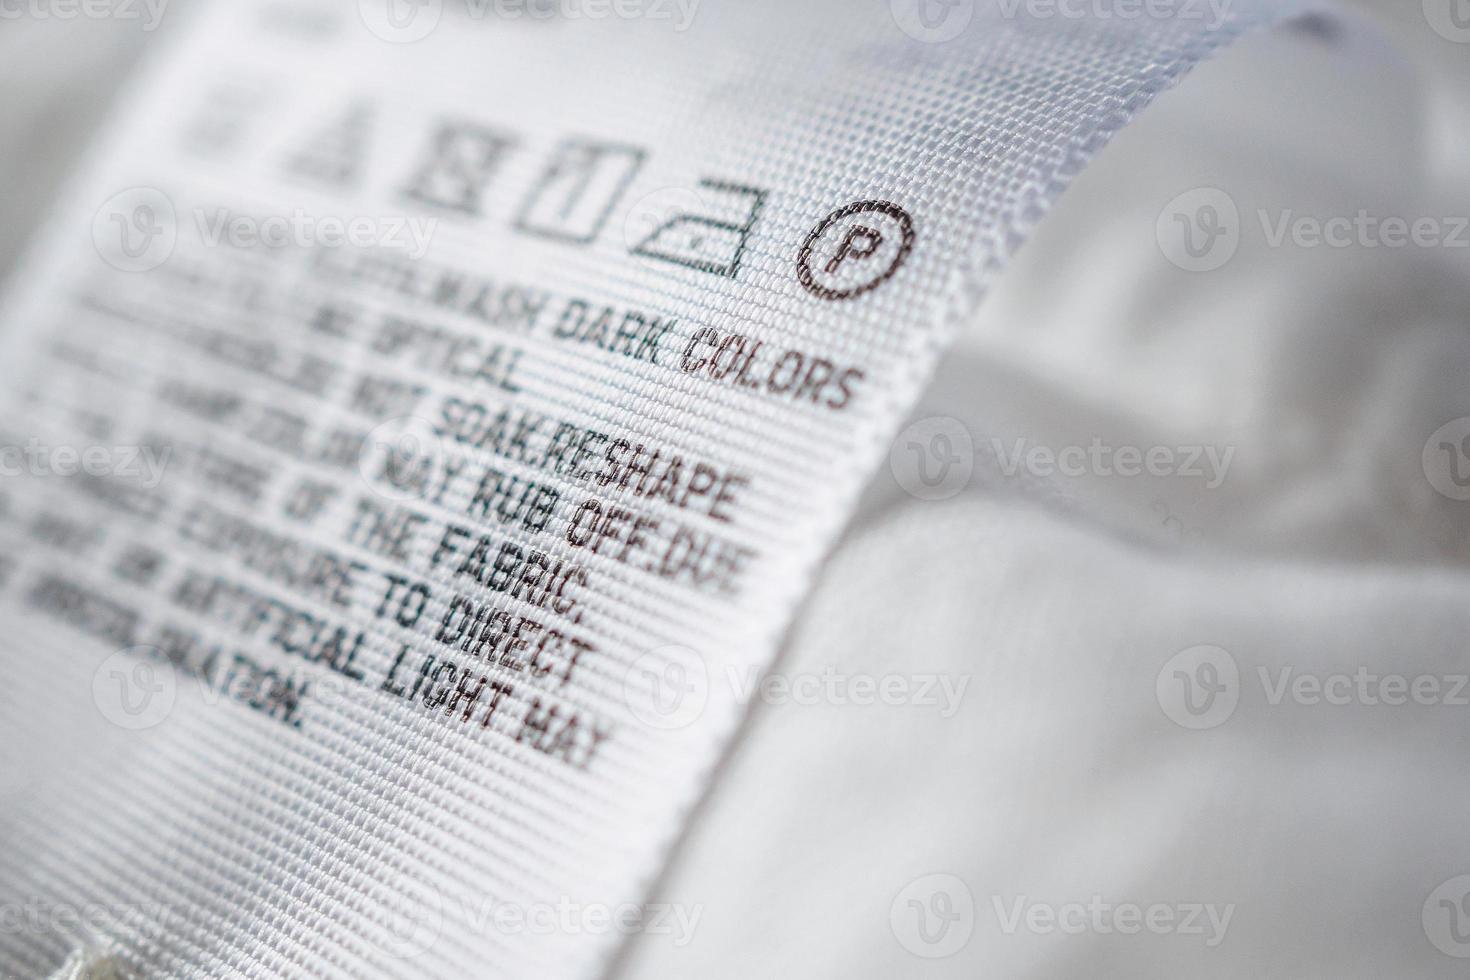 Cloth label tag with laundry care instructions photo